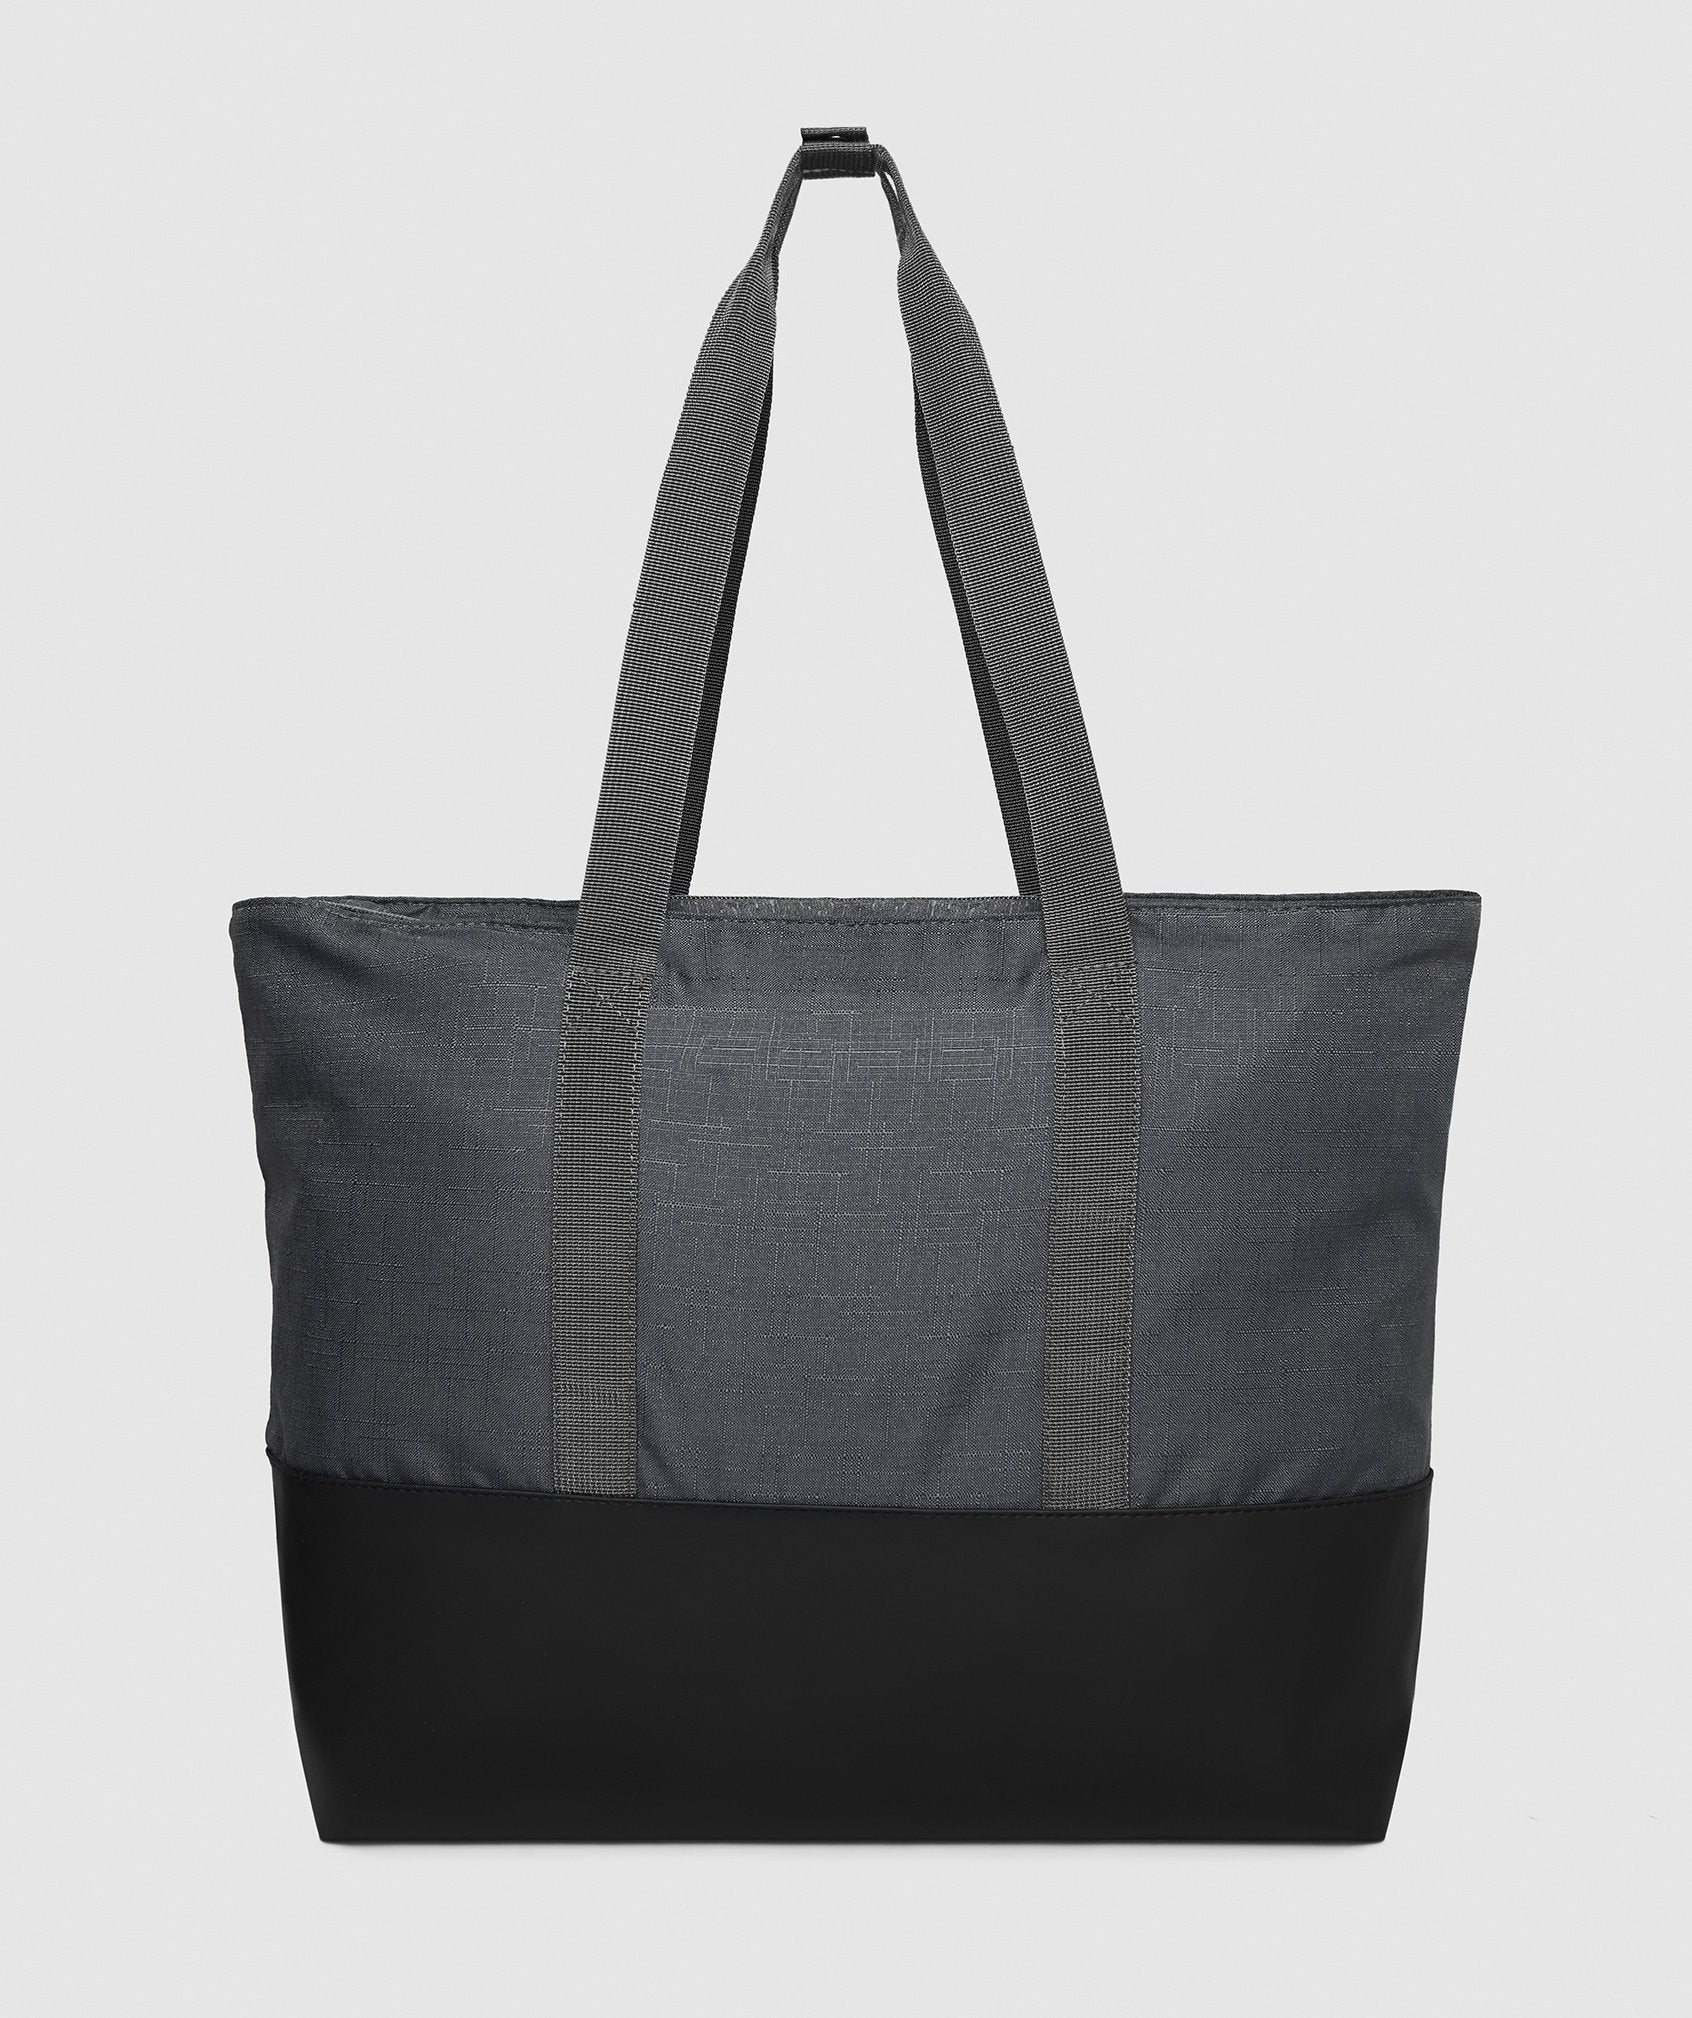 Tote Bag in Charcoal - view 4